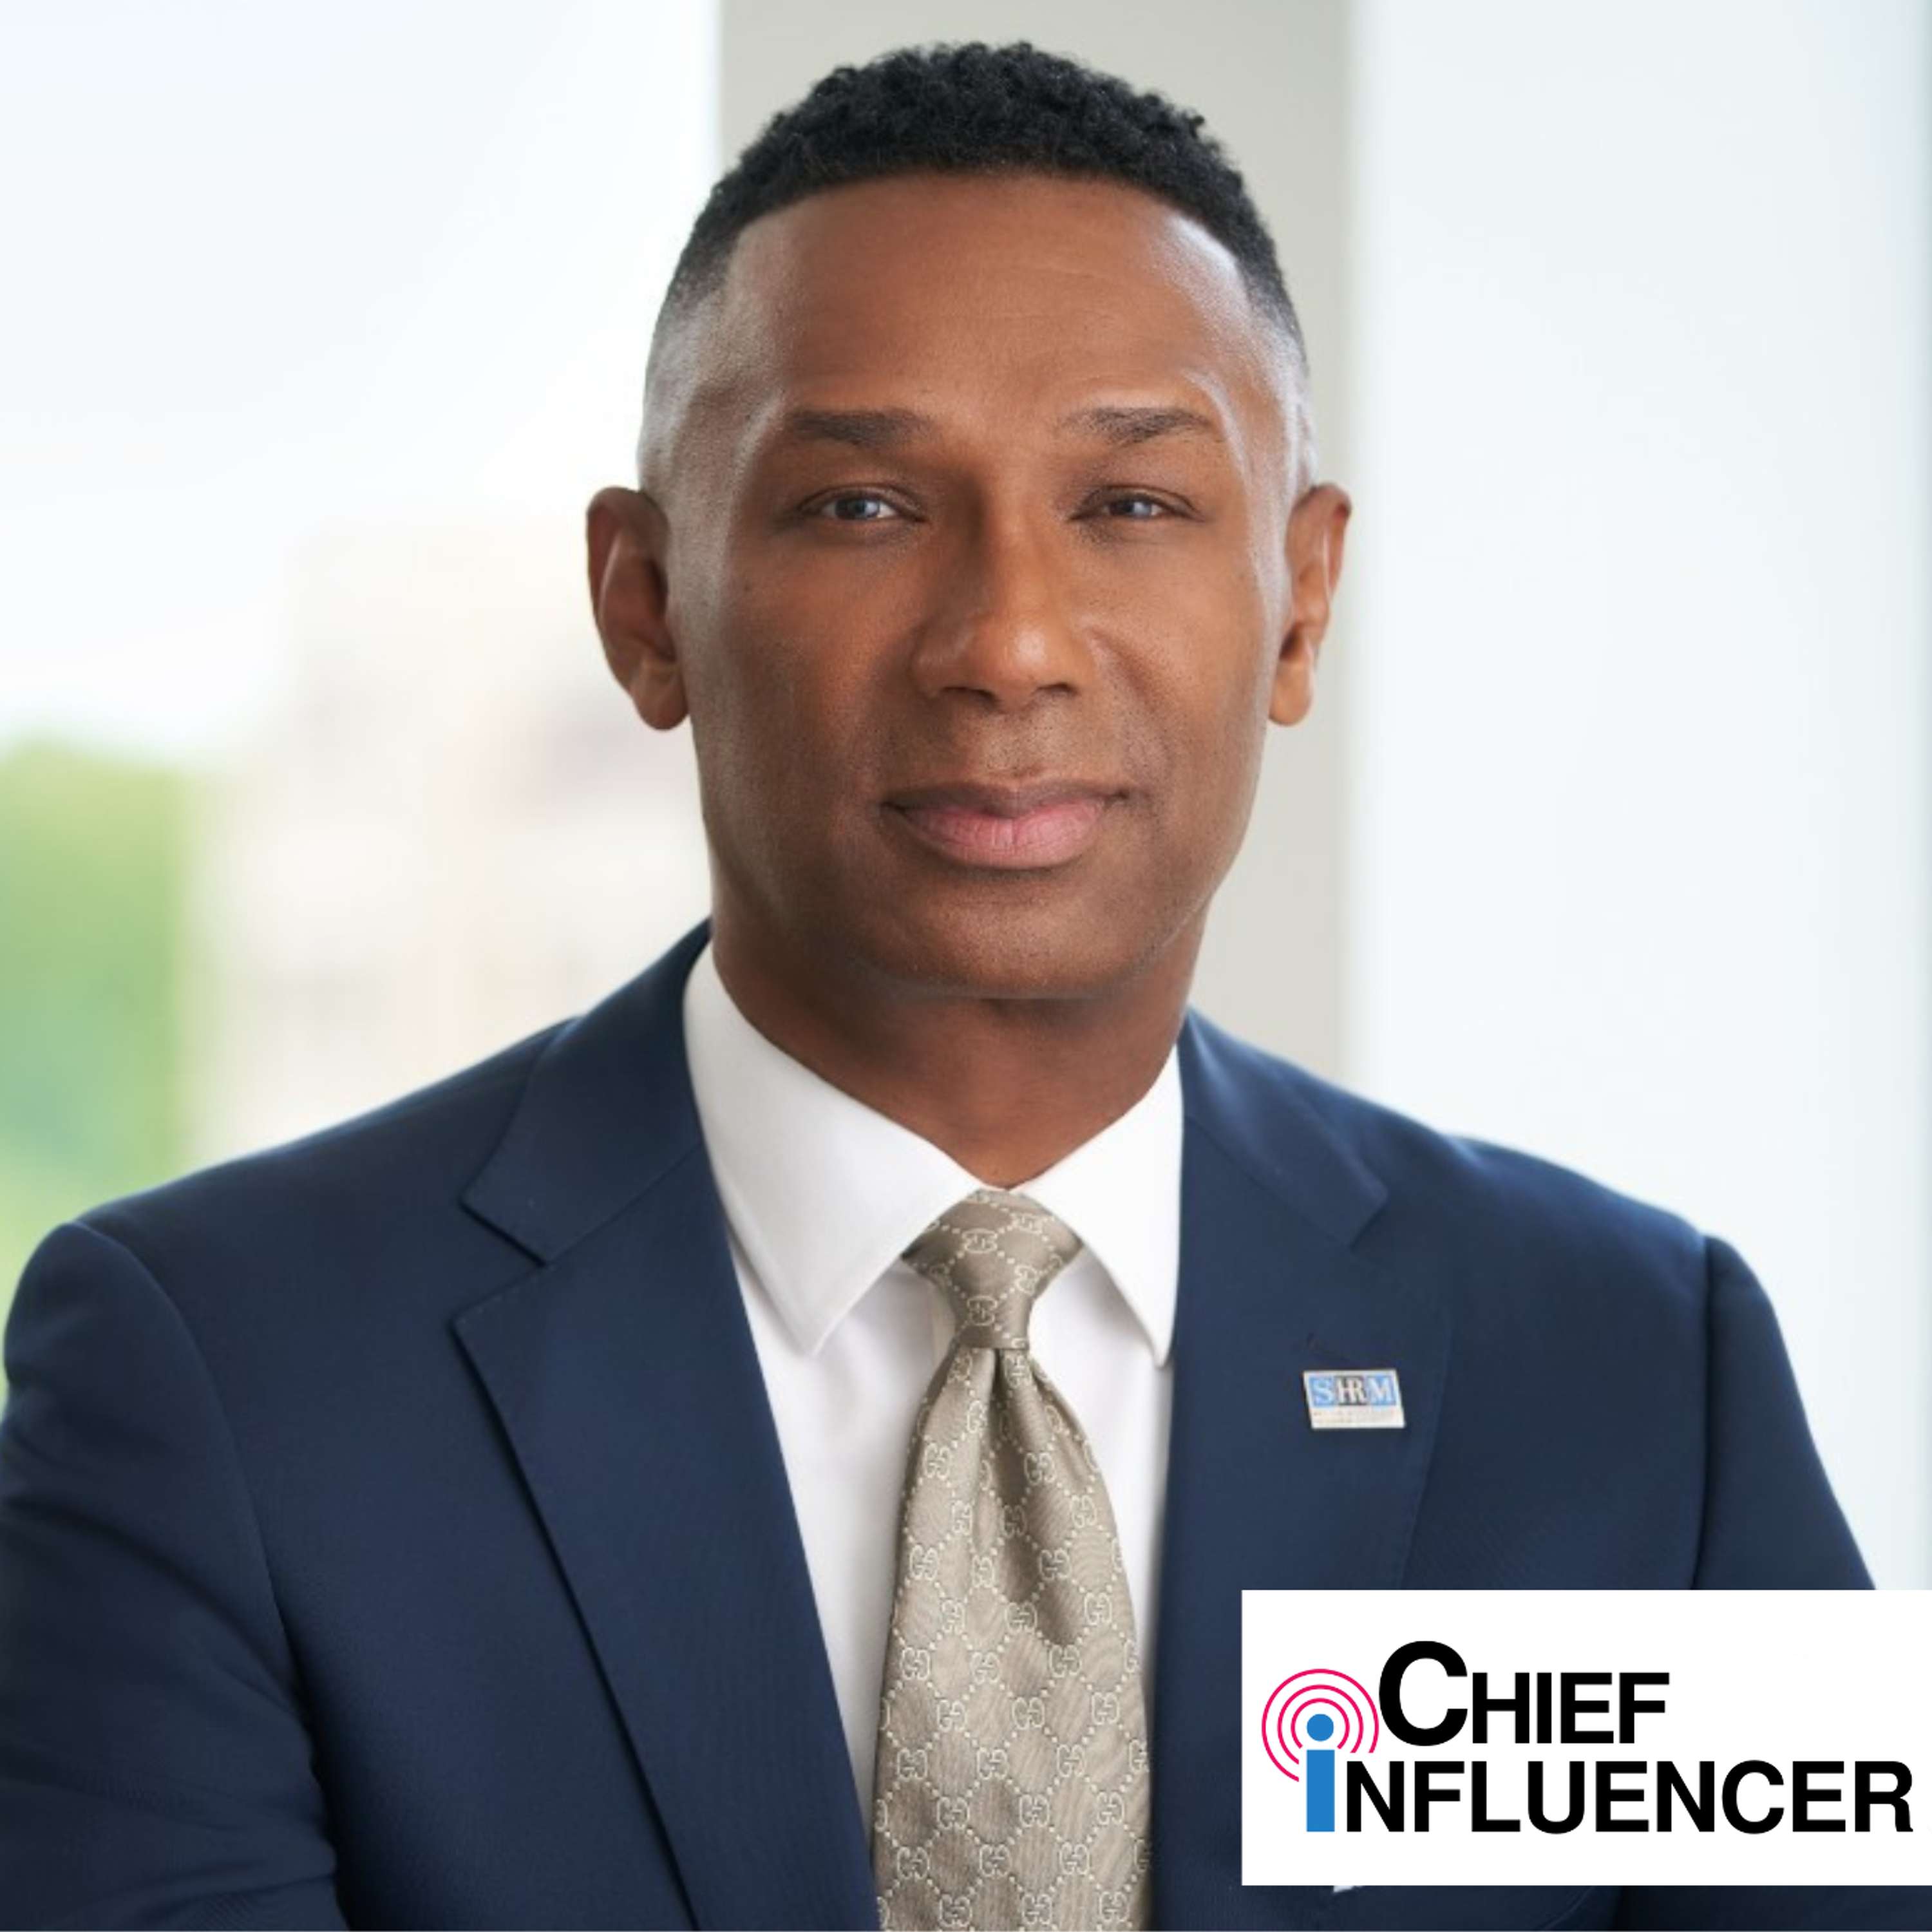 Johnny C. Taylor, Jr. on Modeling Civility and Disagreeing Better - Chief Influencer - Episode # 050